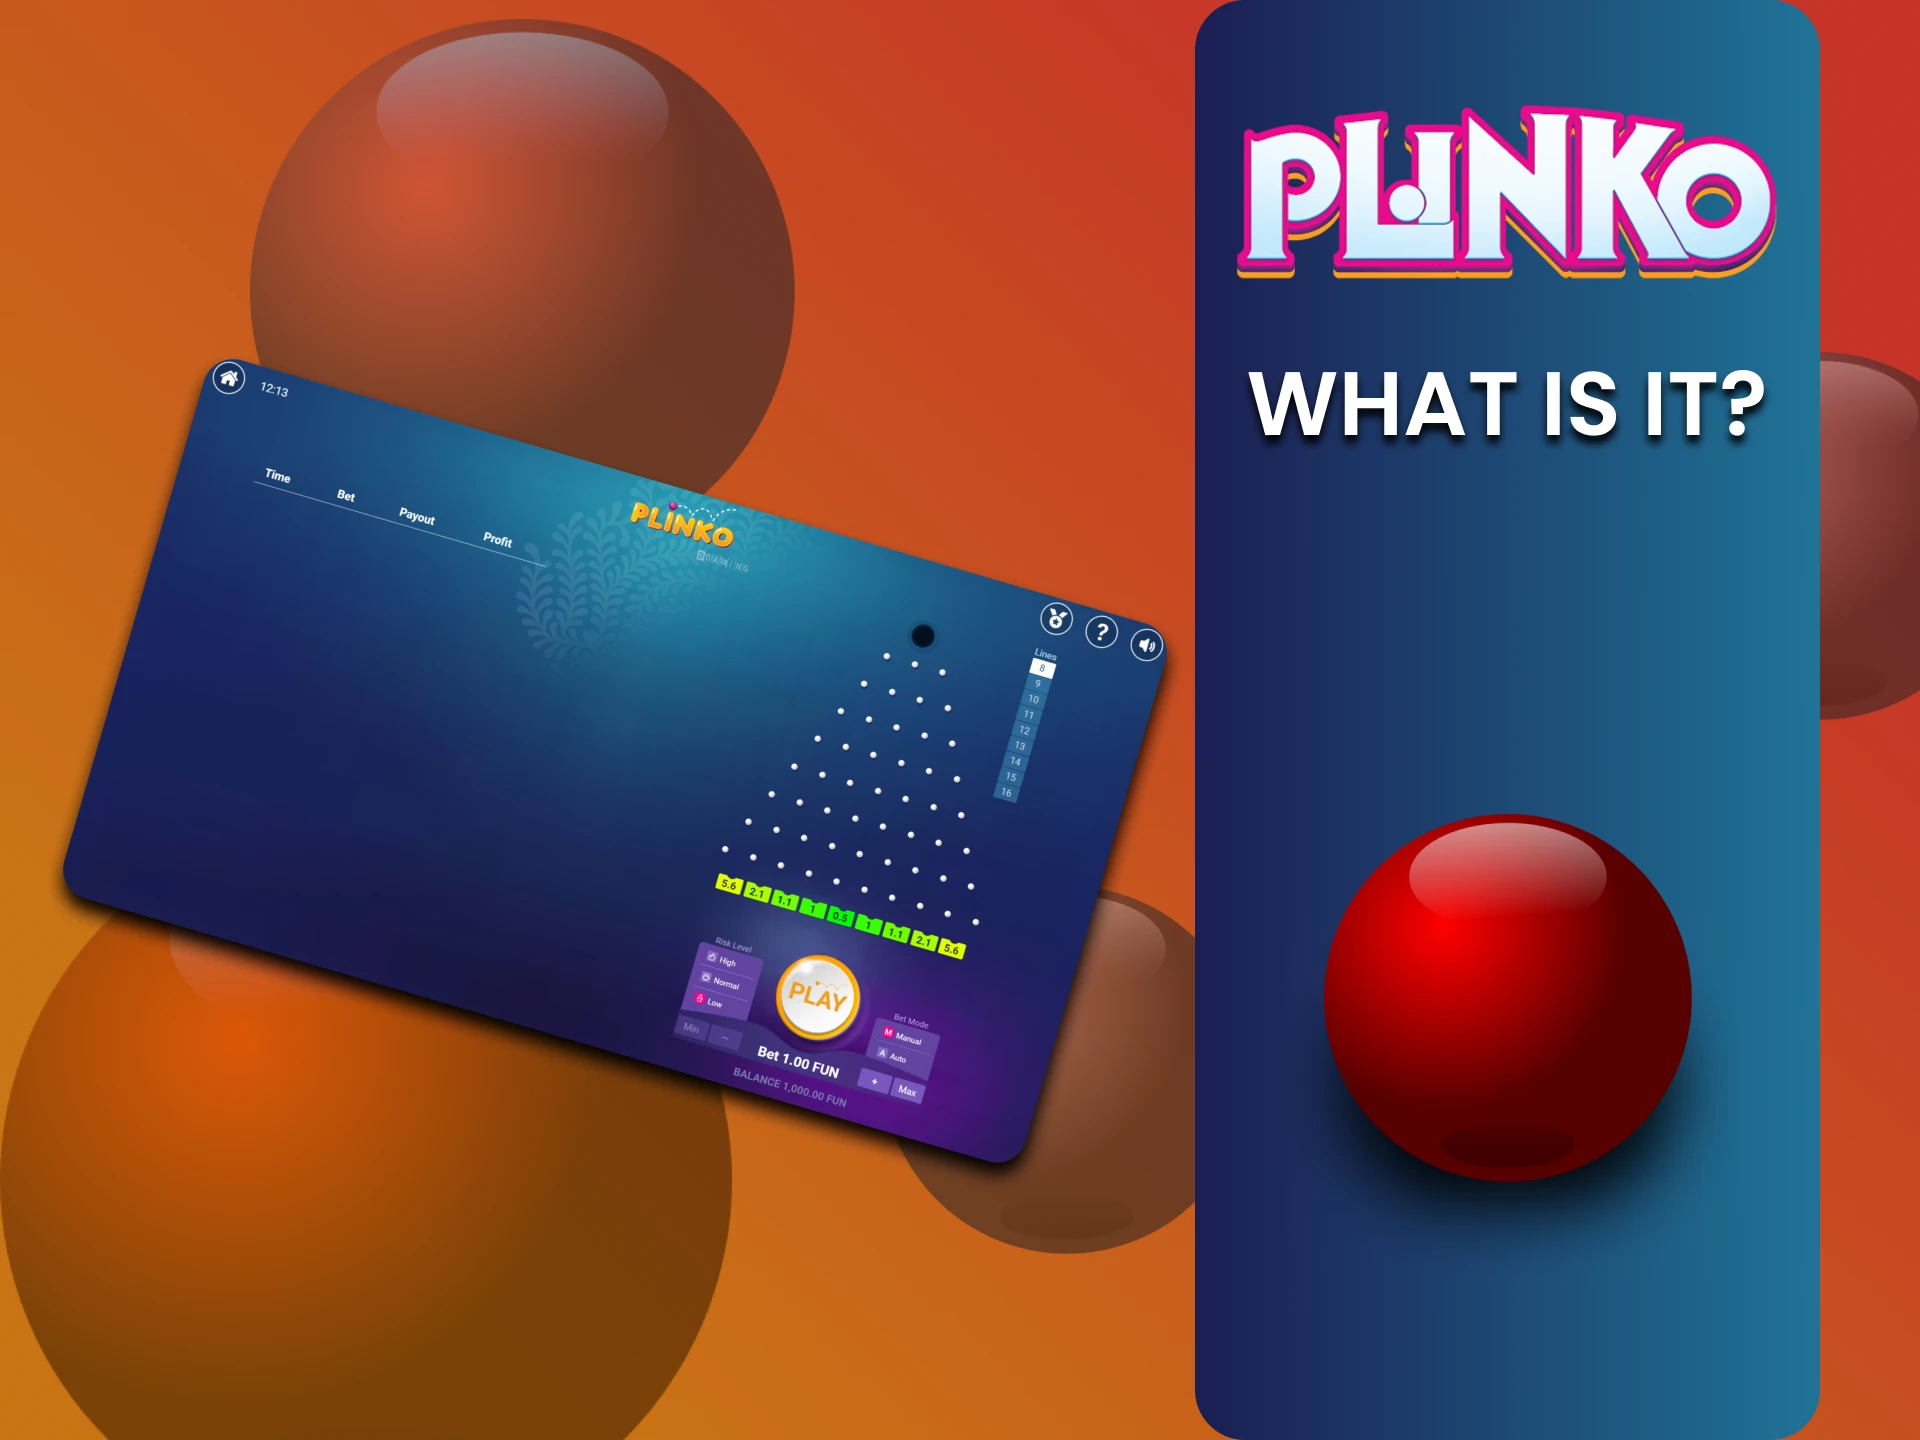 We will tell you what Plinko is.